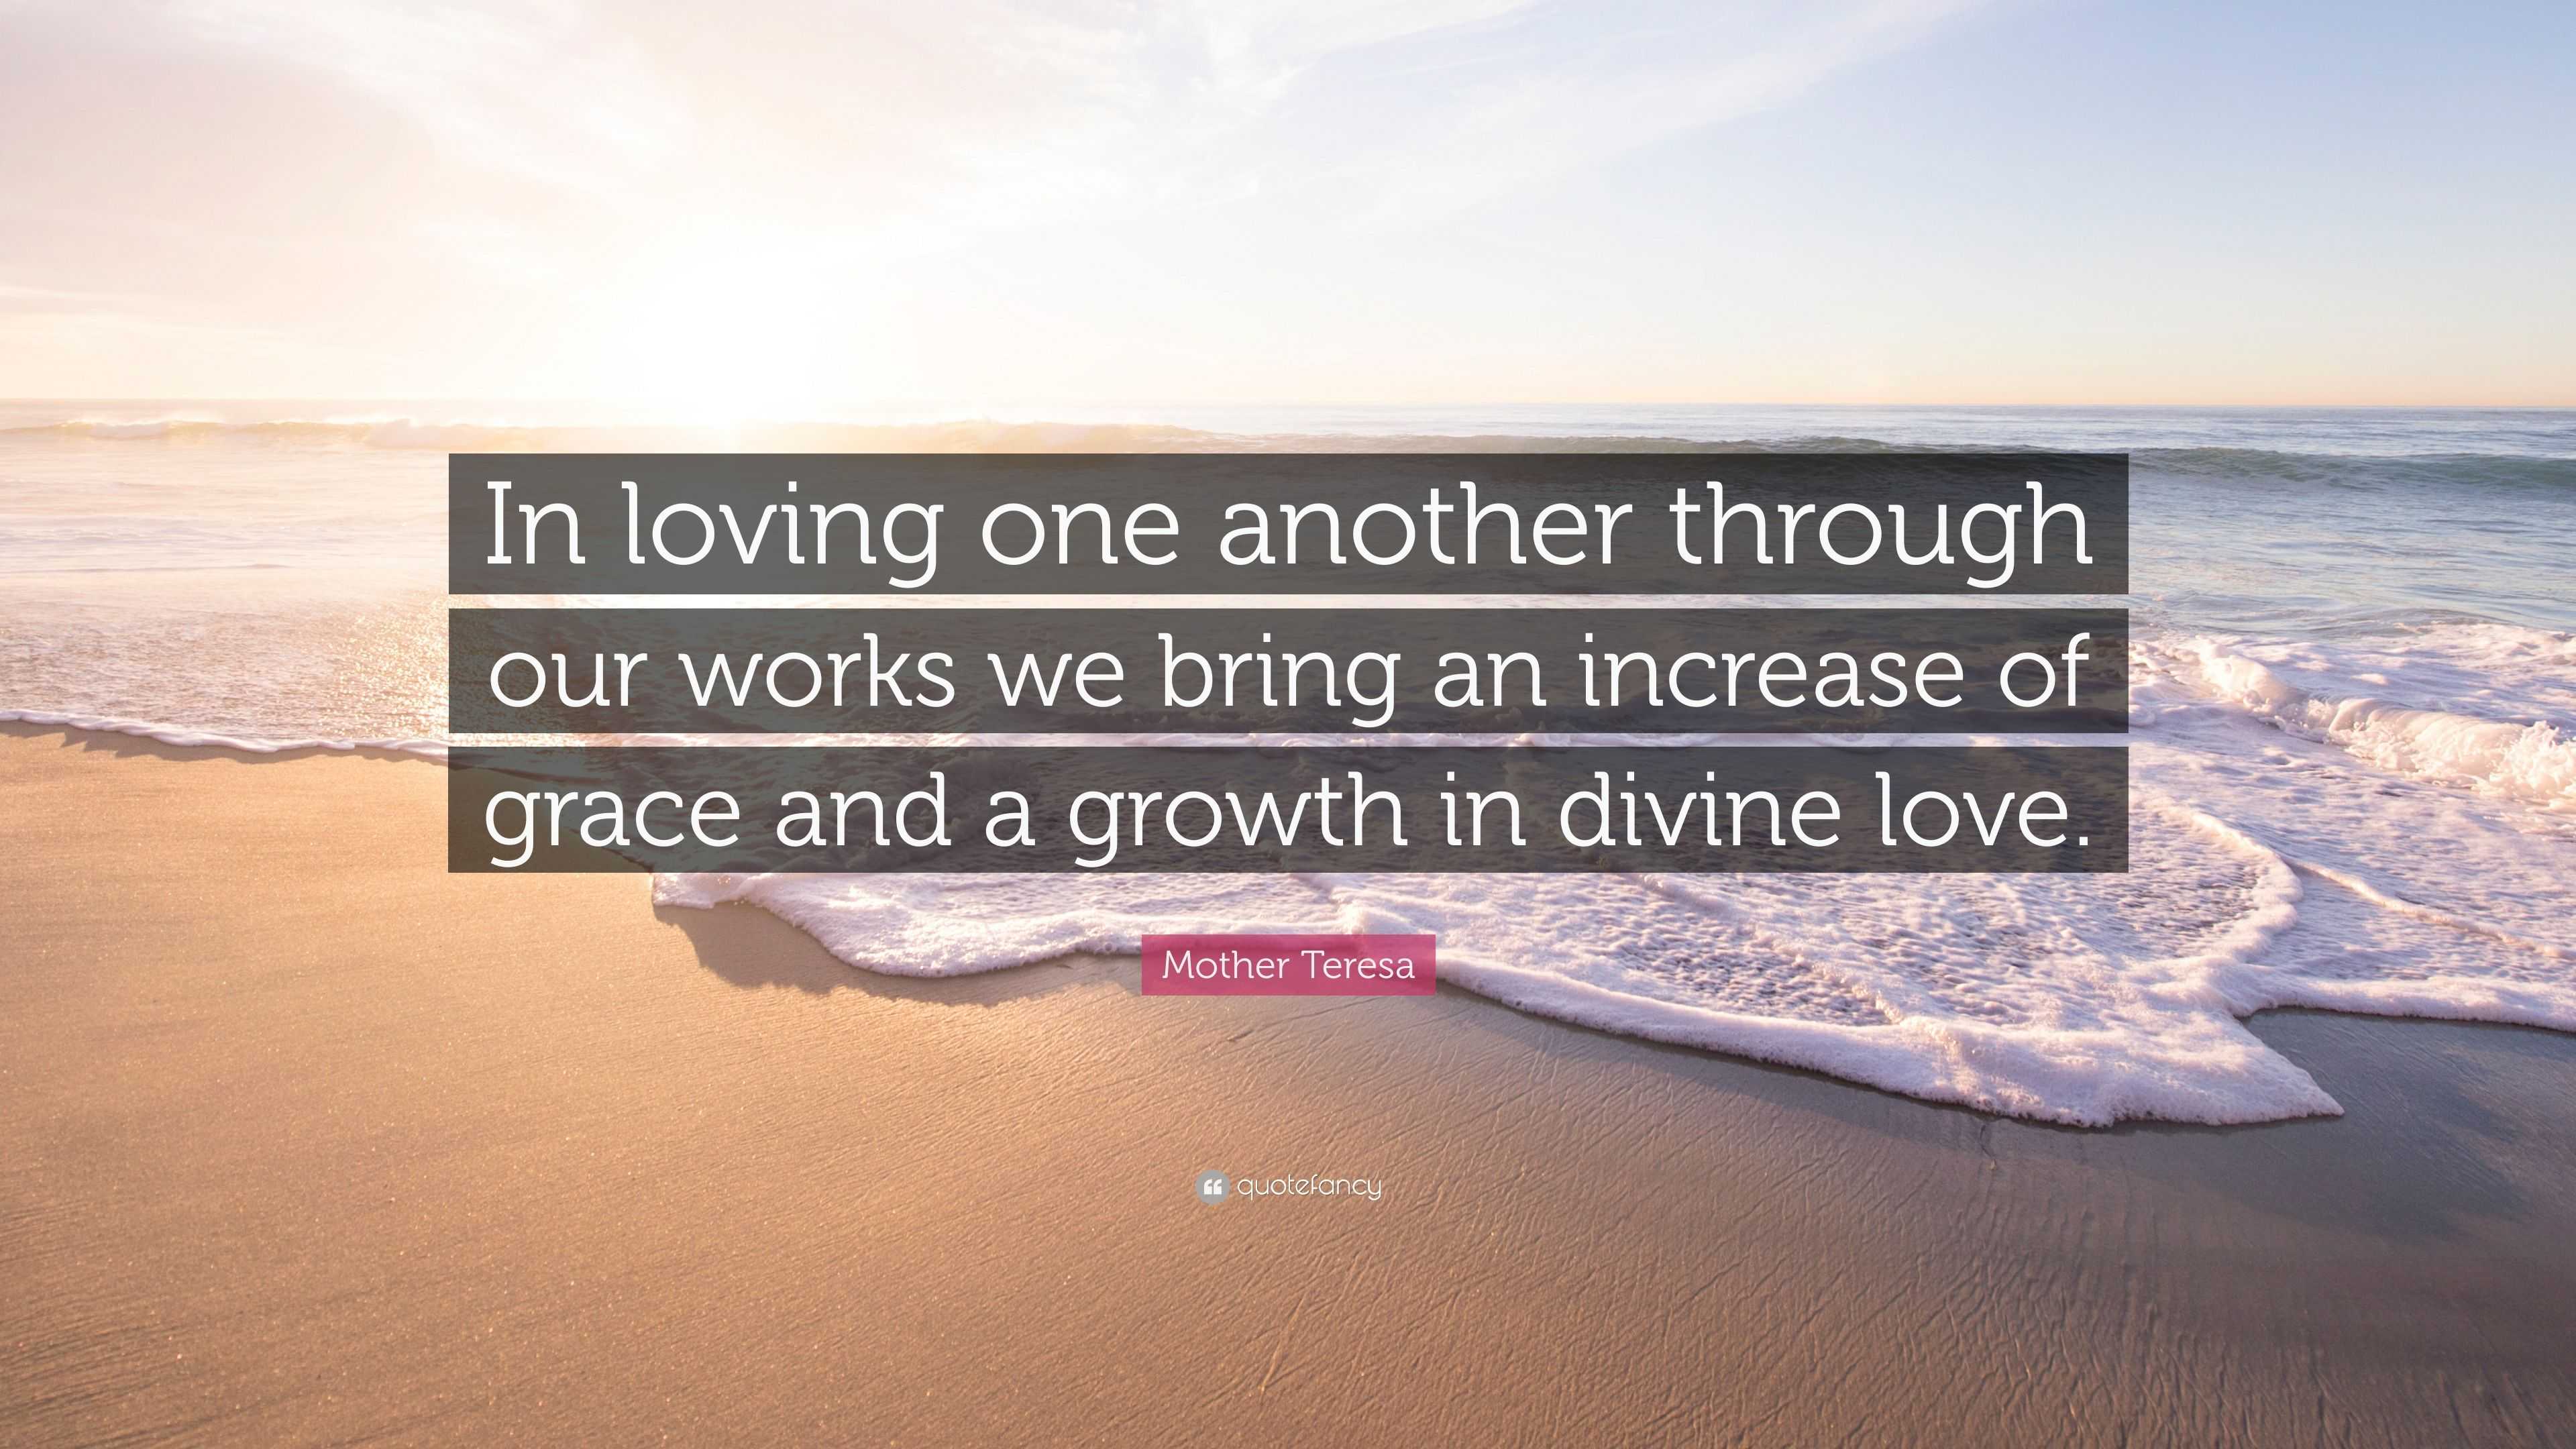 Mother Teresa Quote “In loving one another through our works we bring an increase